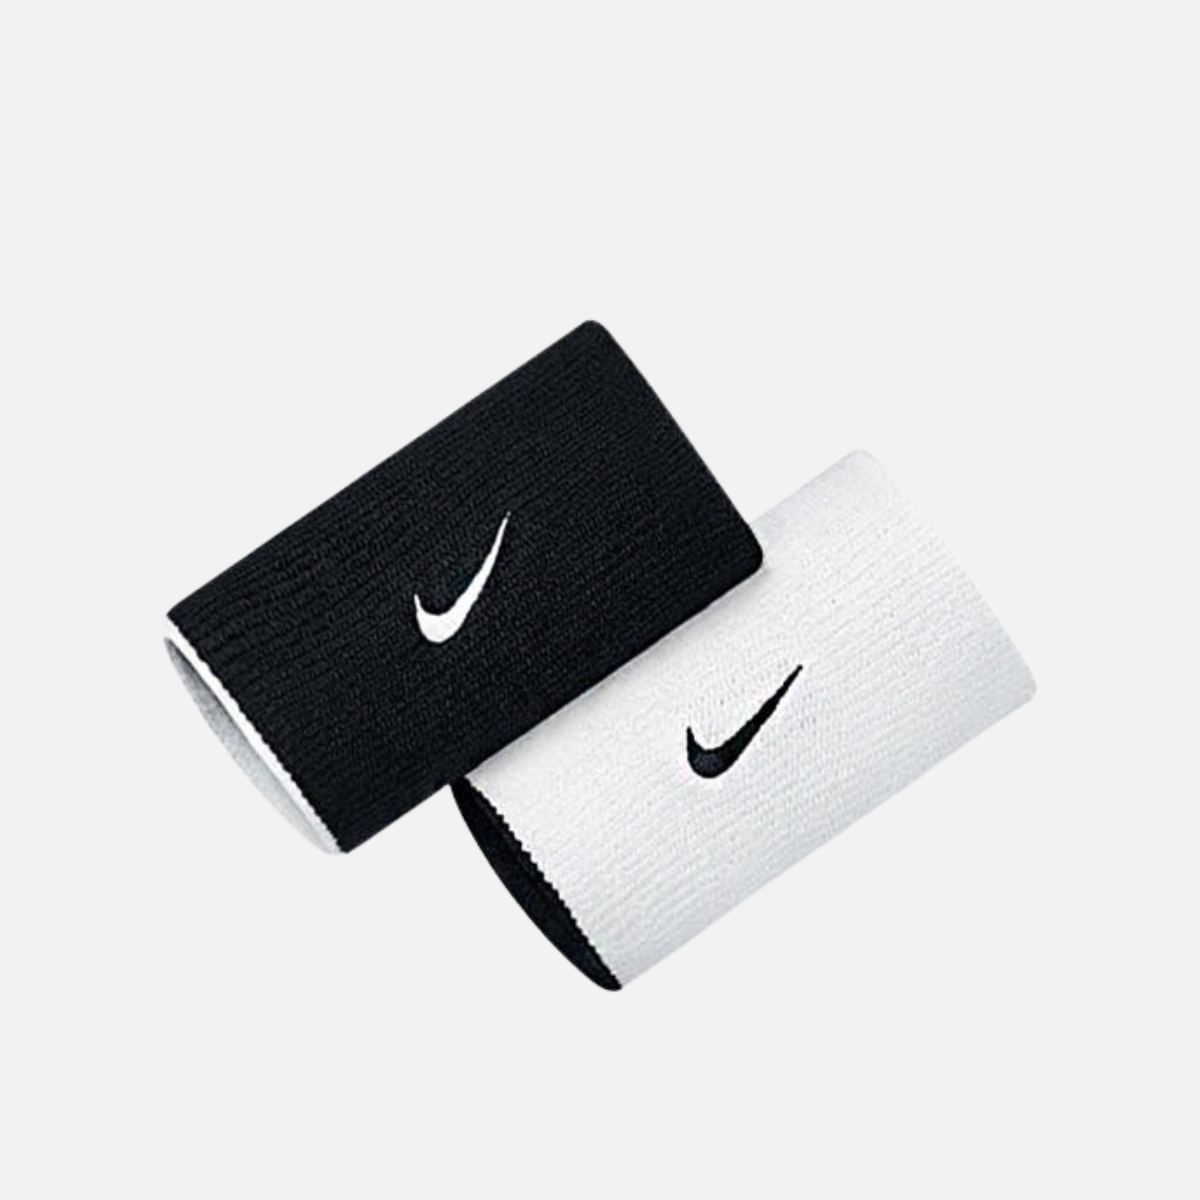 Nike Dri-fit Home & Away Doublewide Double Face Wrist band -White/Black